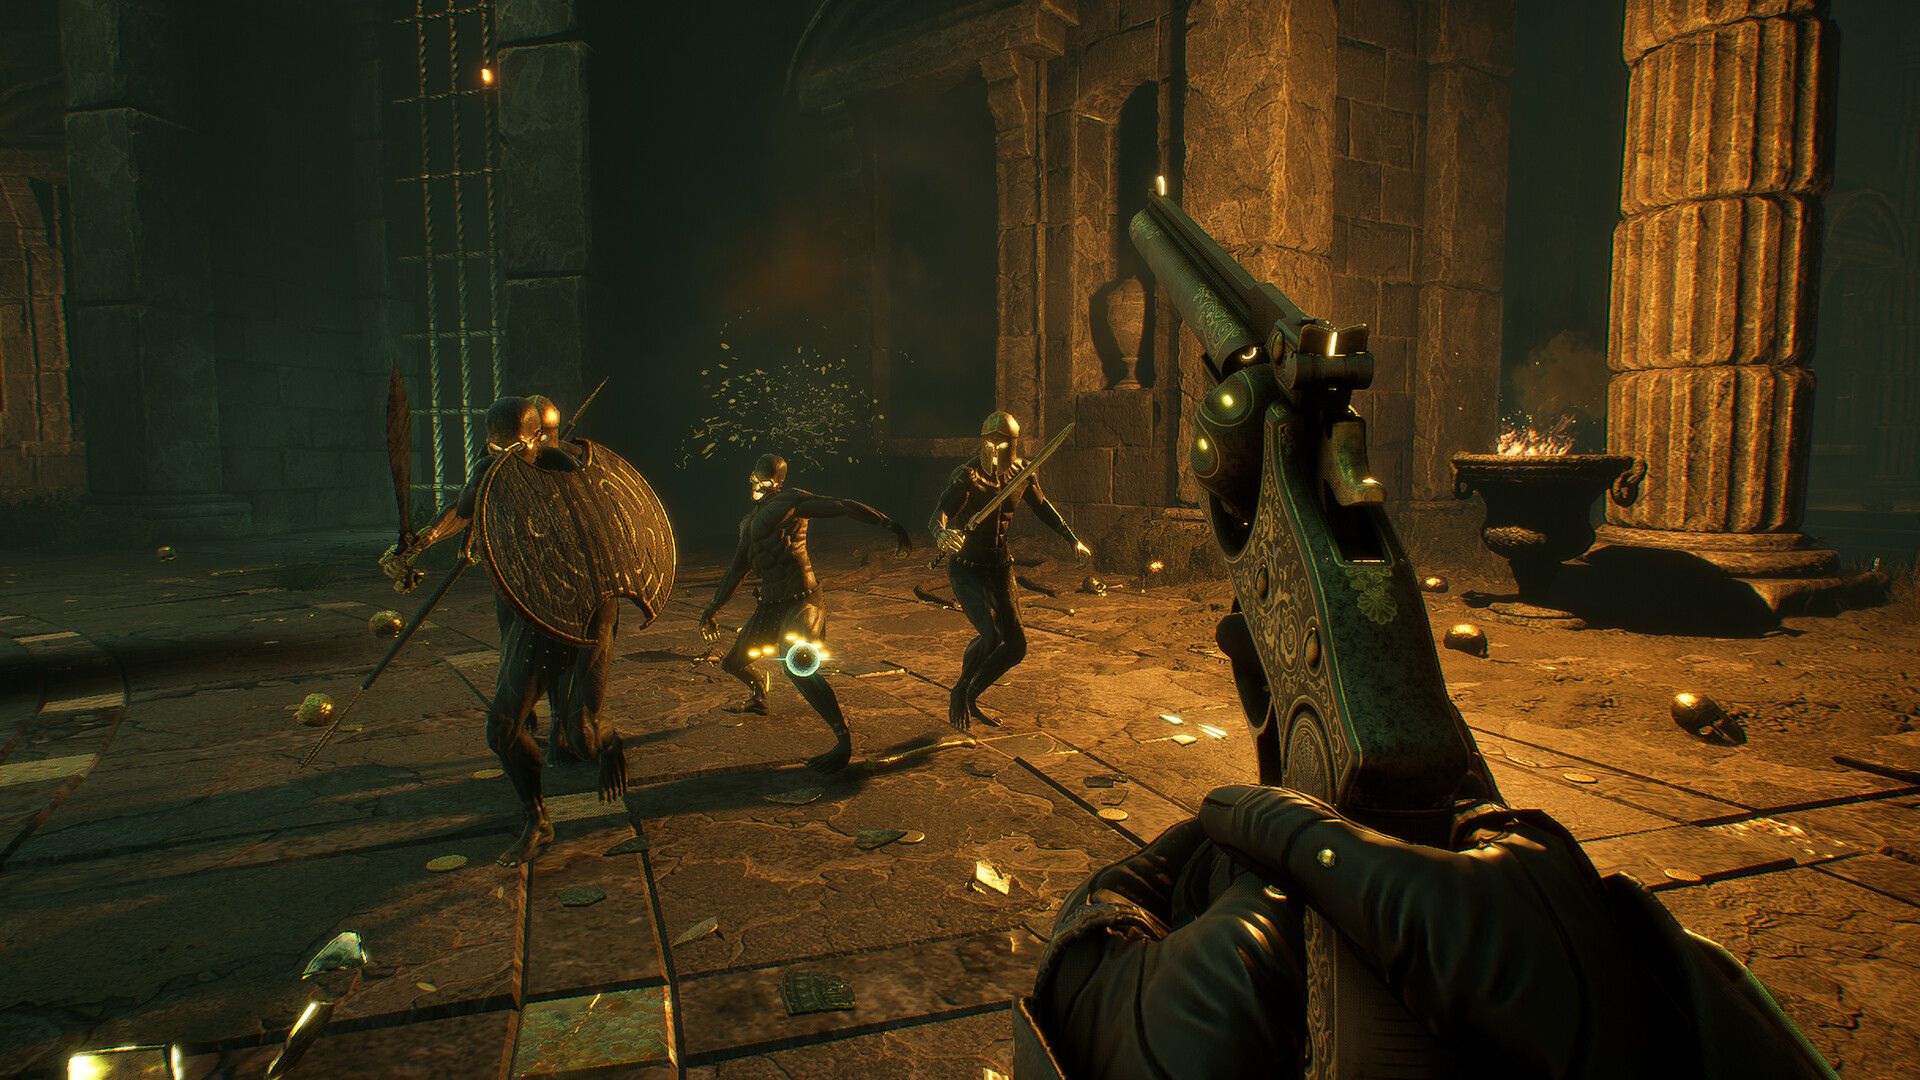 Player firing magnum at undead soldiers with swords and shields